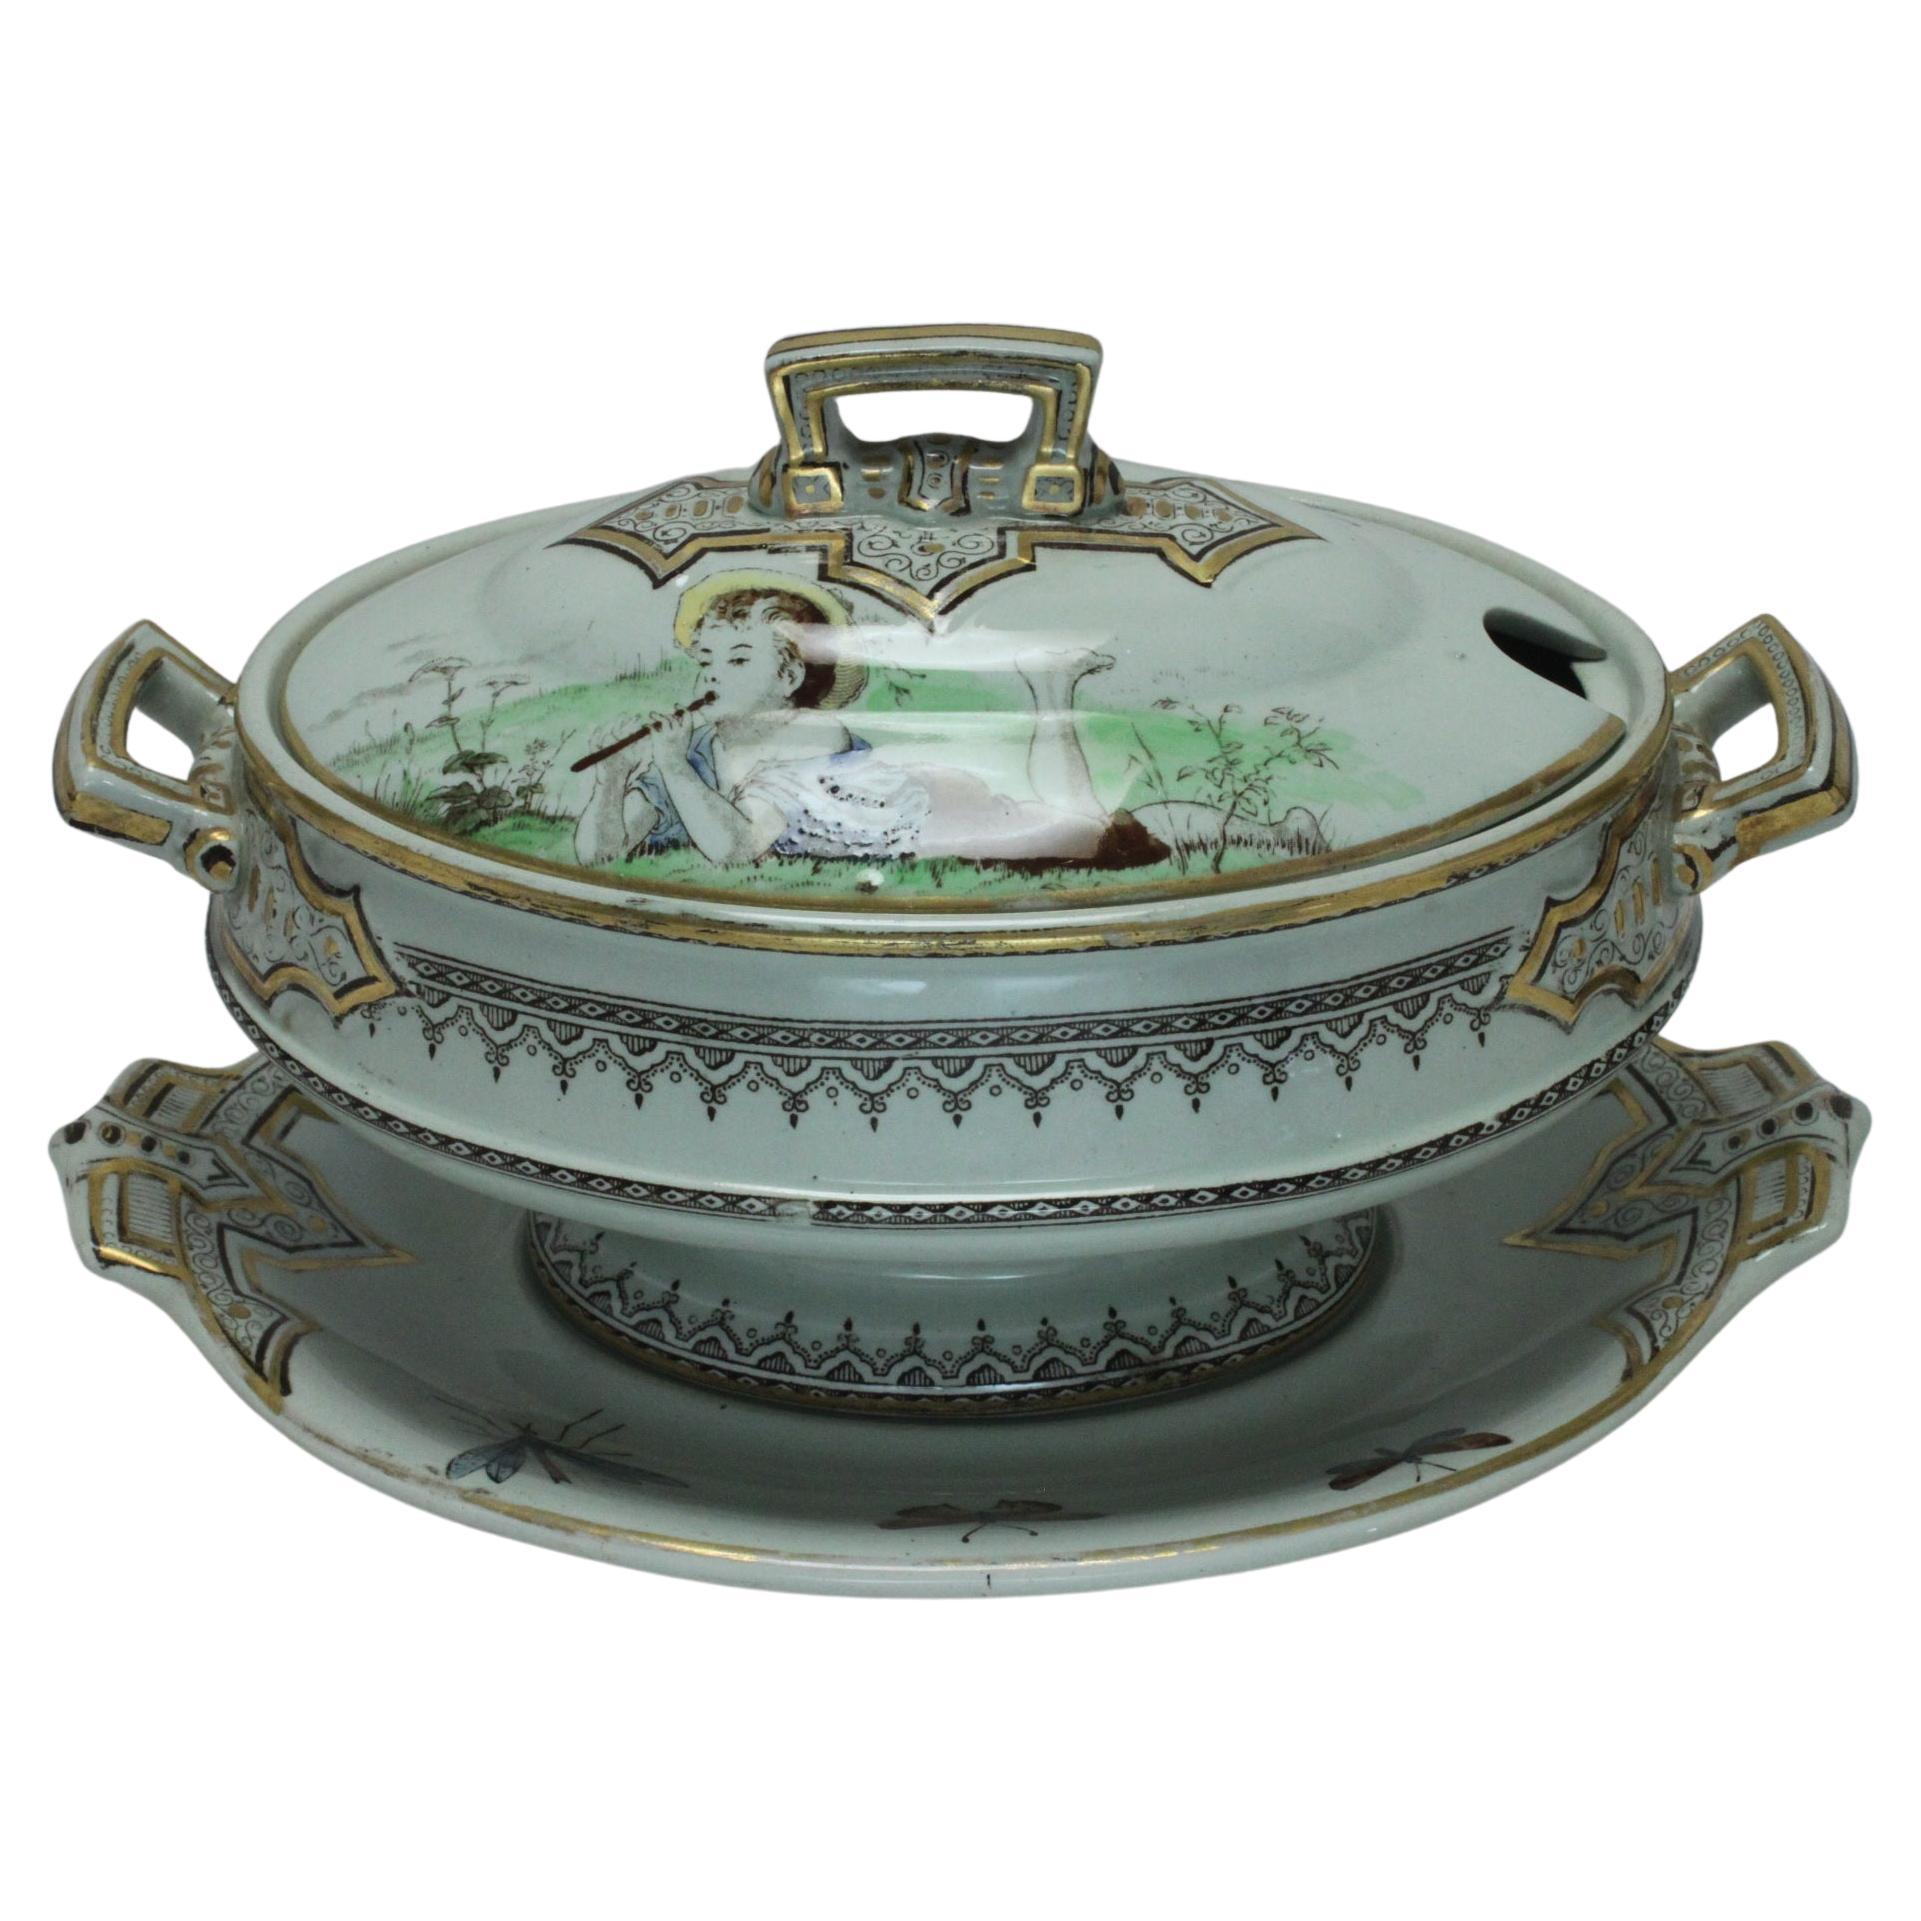 Pinder, Bourne & Co. Sauce Tureen on Stand For Sale